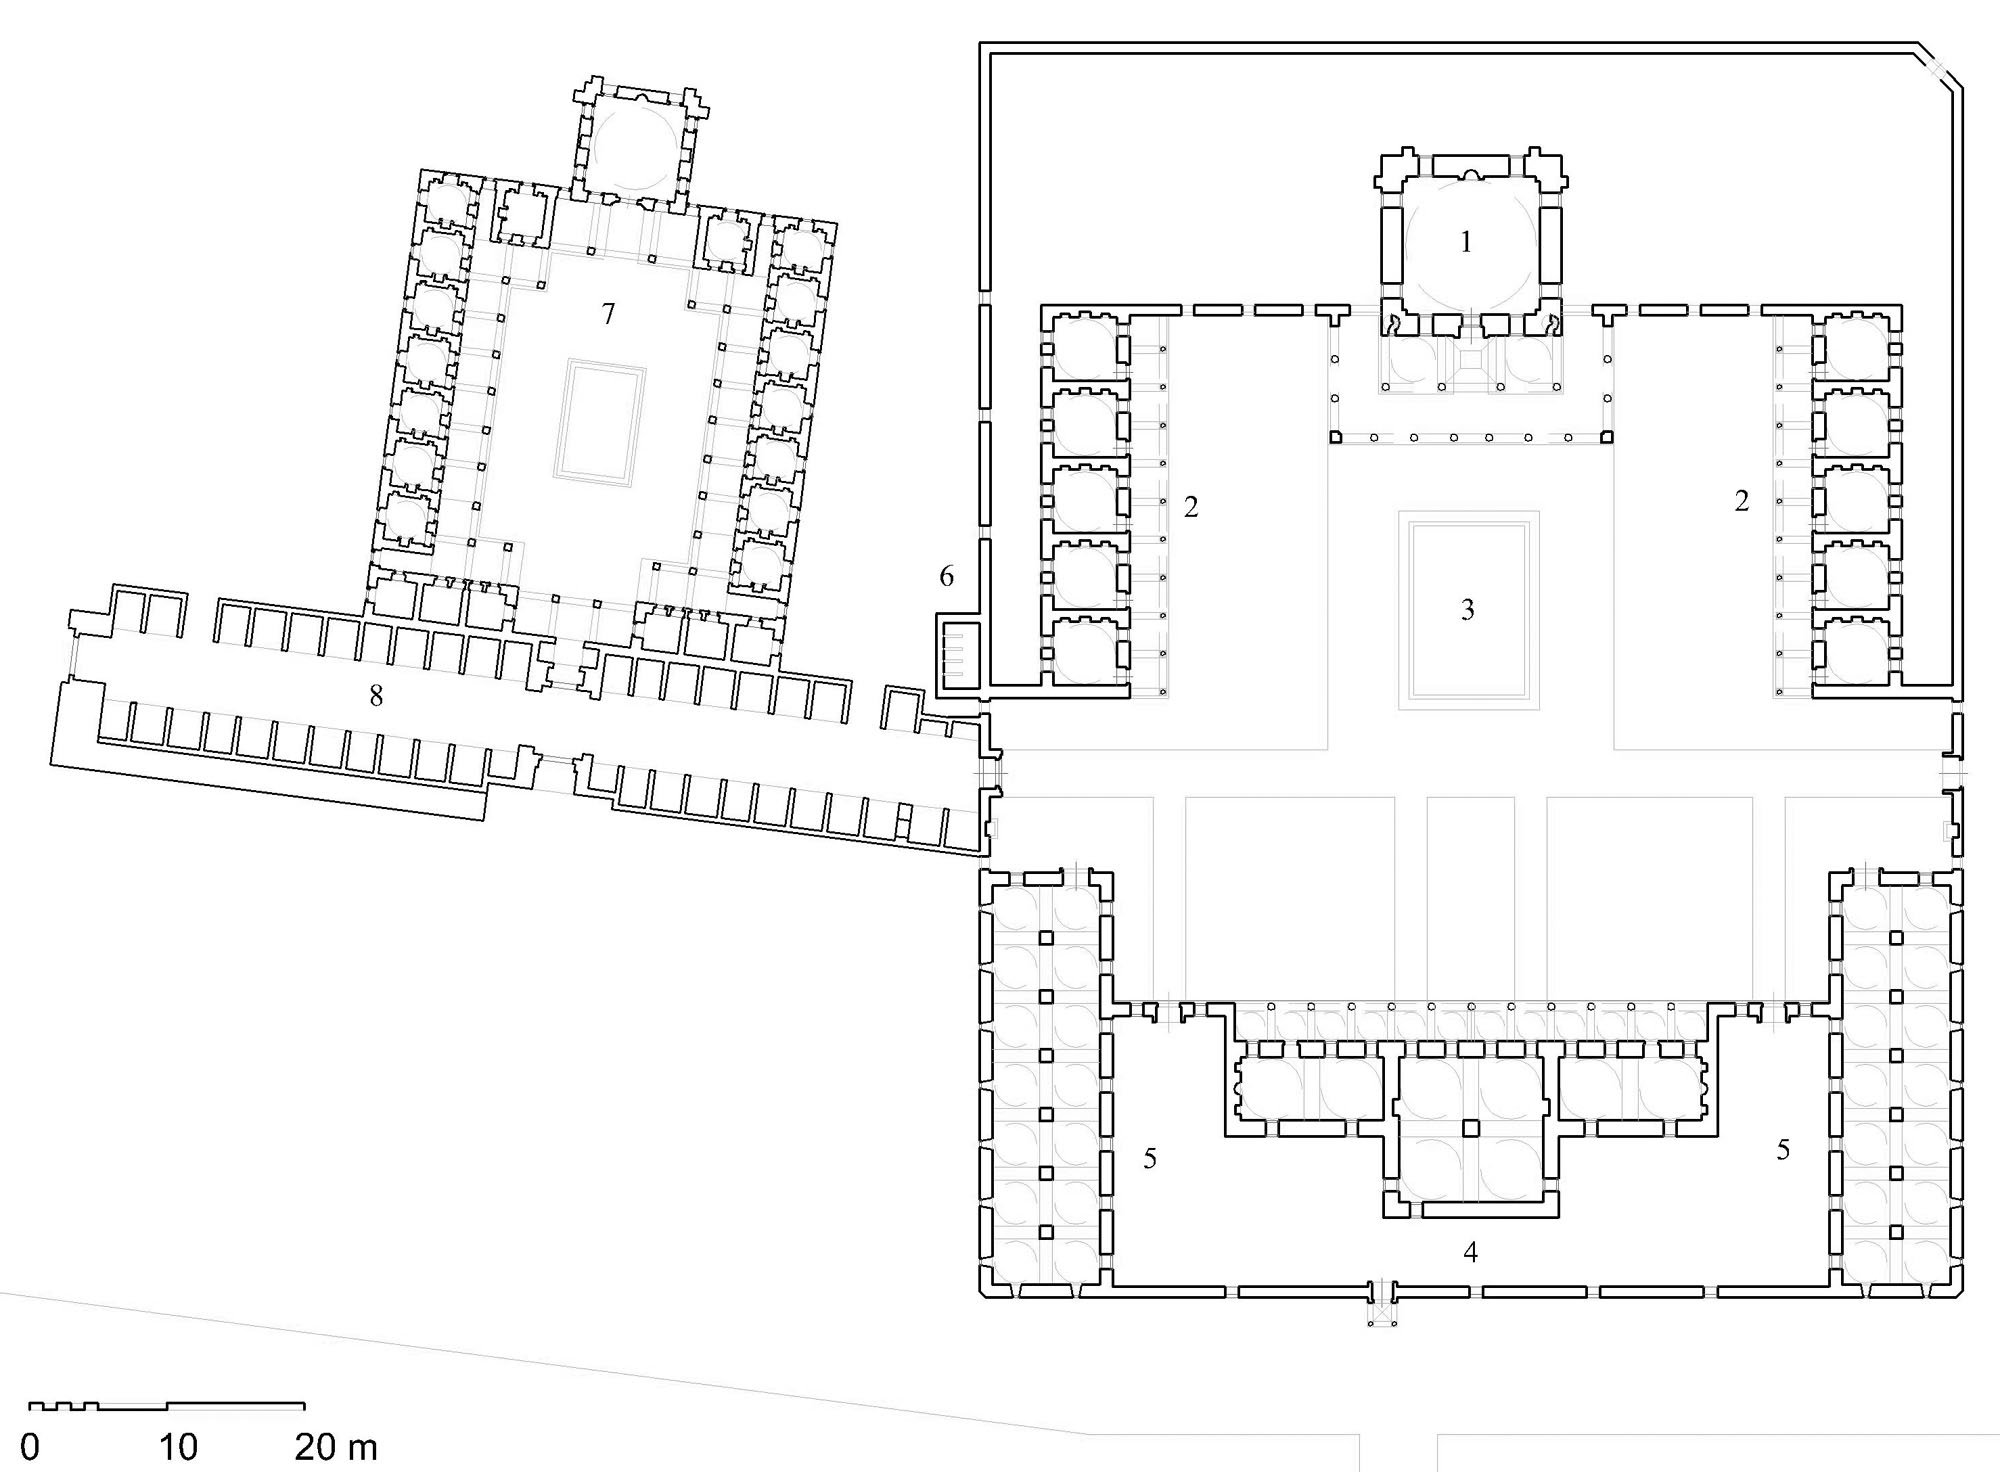 Takiyya al-Sulaymaniyya - Floor plan of complex showing (1) mosque, (2) guestrooms, (3) ablution pool, (4) hospice, (5) caravanserai with stables, (6) latrines, (7) madrasa, (8) bazaar (<i>arasta</i>). DWG file in AutoCAD 2000 format. Click the download button to download a zipped file containing the .dwg file.